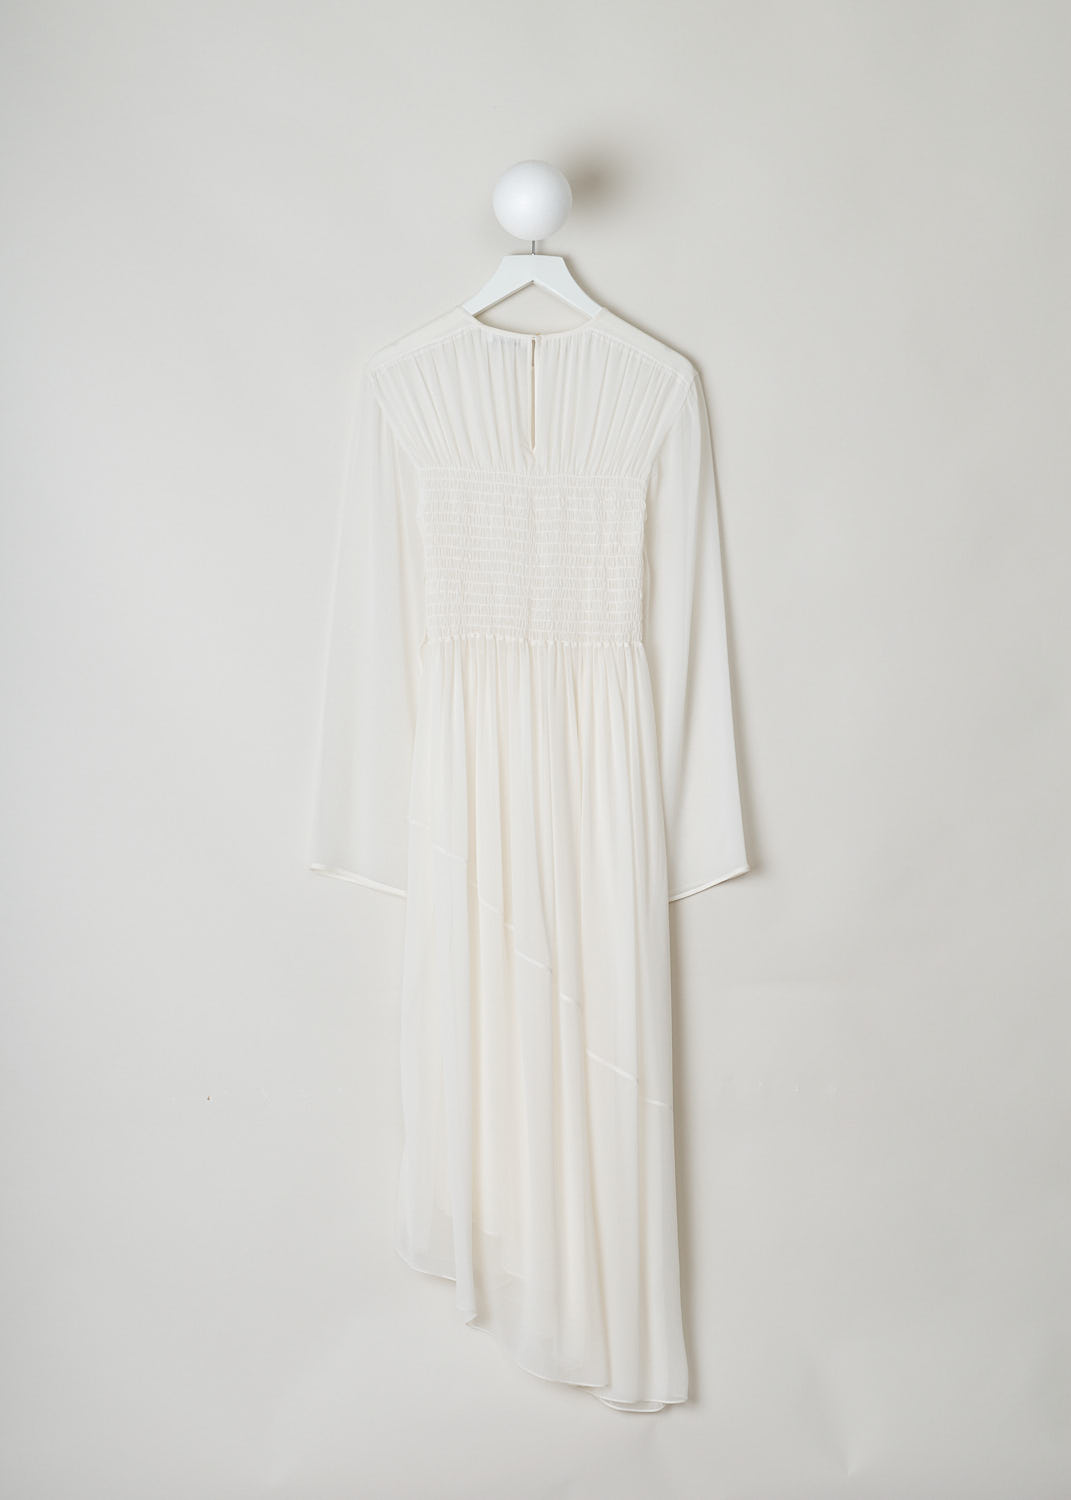 JIL SANDER, WHITE DRESS WITH SHIRRED BODICE, White, Back, This white long sleeve dress has pleats across the chest and a shirred bodice. The dress is made in a semi sheer fabric.  The skirt flows out from small crystal pleats. The hemline has an asymmetric finish, meaning that from left to right one side is longer than the other. A single button can be found in the back of the neck.
